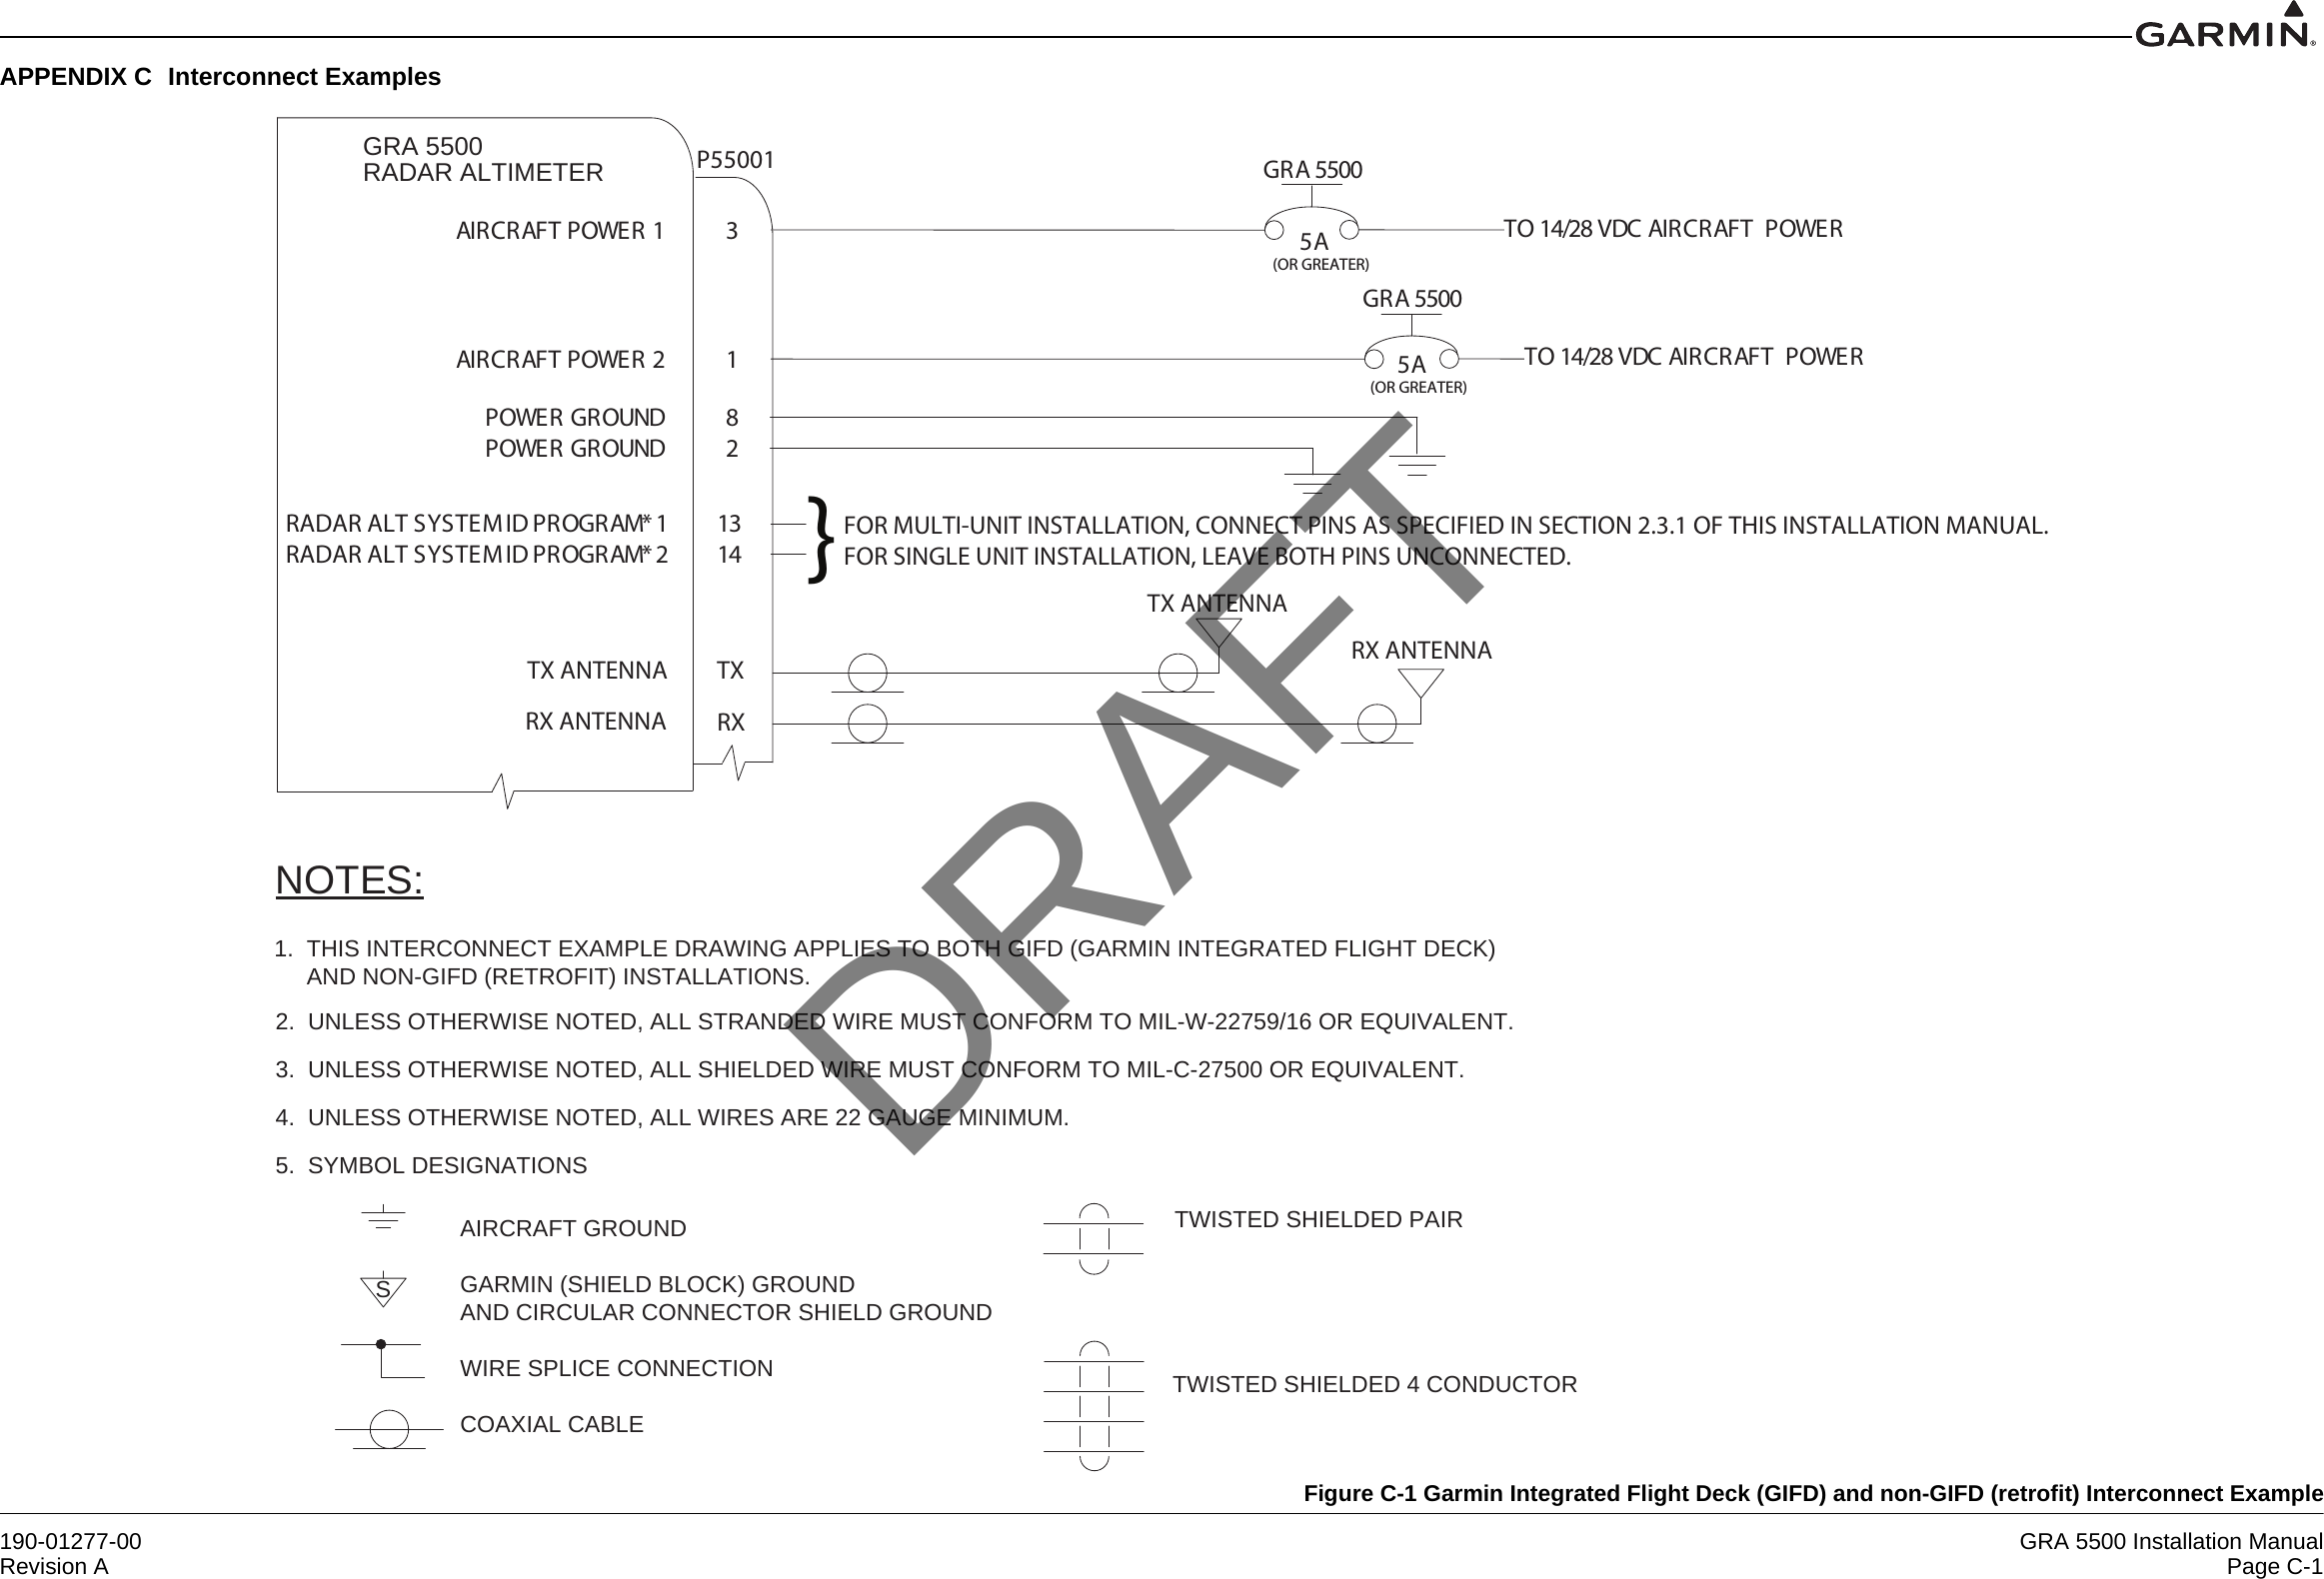 190-01277-00 GRA 5500 Installation ManualRevision A Page C-1APPENDIX C Interconnect ExamplesFigure C-1 Garmin Integrated Flight Deck (GIFD) and non-GIFD (retrofit) Interconnect ExampleGRA 5500RADAR ALTIMETERTO 14/28 VDC AIRCRAFT  POWERGR A 5500 5A(OR GREATER)P55001AIR CR AFT POWE R  1 3TO 14/28 VDC AIRCRAFT  POWERAIR CR AFT POWE R  2 1POWER GROUND 8POWER GROUND 2GRGRNOTES:2. UNLESS OTHERWISE NOTED, ALL STRANDED WIRE MUST CONFORM TO MIL-W-22759/16 OR EQUIVALENT.3. UNLESS OTHERWISE NOTED, ALL SHIELDED WIRE MUST CONFORM TO MIL-C-27500 OR EQUIVALENT.4. UNLESS OTHERWISE NOTED, ALL WIRES ARE 22 GAUGE MINIMUM.5. SYMBOL DESIGNATIONSSTWISTED SHIELDED PAIRTWISTED SHIELDED 4 CONDUCTORAIRCRAFT GROUNDGARMIN (SHIELD BLOCK) GROUNDAND CIRCULAR CONNECTOR SHIELD GROUNDWIRE SPLICE CONNECTIONCOAXIAL CABLETX ANTENNARX ANTENNATXRX5A(OR GREATER)RADAR ALT SYSTEM ID PRO AM* 1 13RADAR ALT SYSTEM ID PRO AM* 2 14 }FOR MULTI-UNIT INSTALLATION, CONNECT PINS AS SPECIFIED IN SECTION 2.3.1 OF THIS INSTALLATION MANUAL.FOR SINGLE UNIT INSTALLATION, LEAVE BOTH PINS UNCONNECTED.GR A 5500 TX ANTENNARX ANTENNA1. THIS INTERCONNECT EXAMPLE DRAWING APPLIES TO BOTH GIFD (GARMIN INTEGRATED FLIGHT DECK)AND NON-GIFD (RETROFIT) INSTALLATIONS.DRAFT